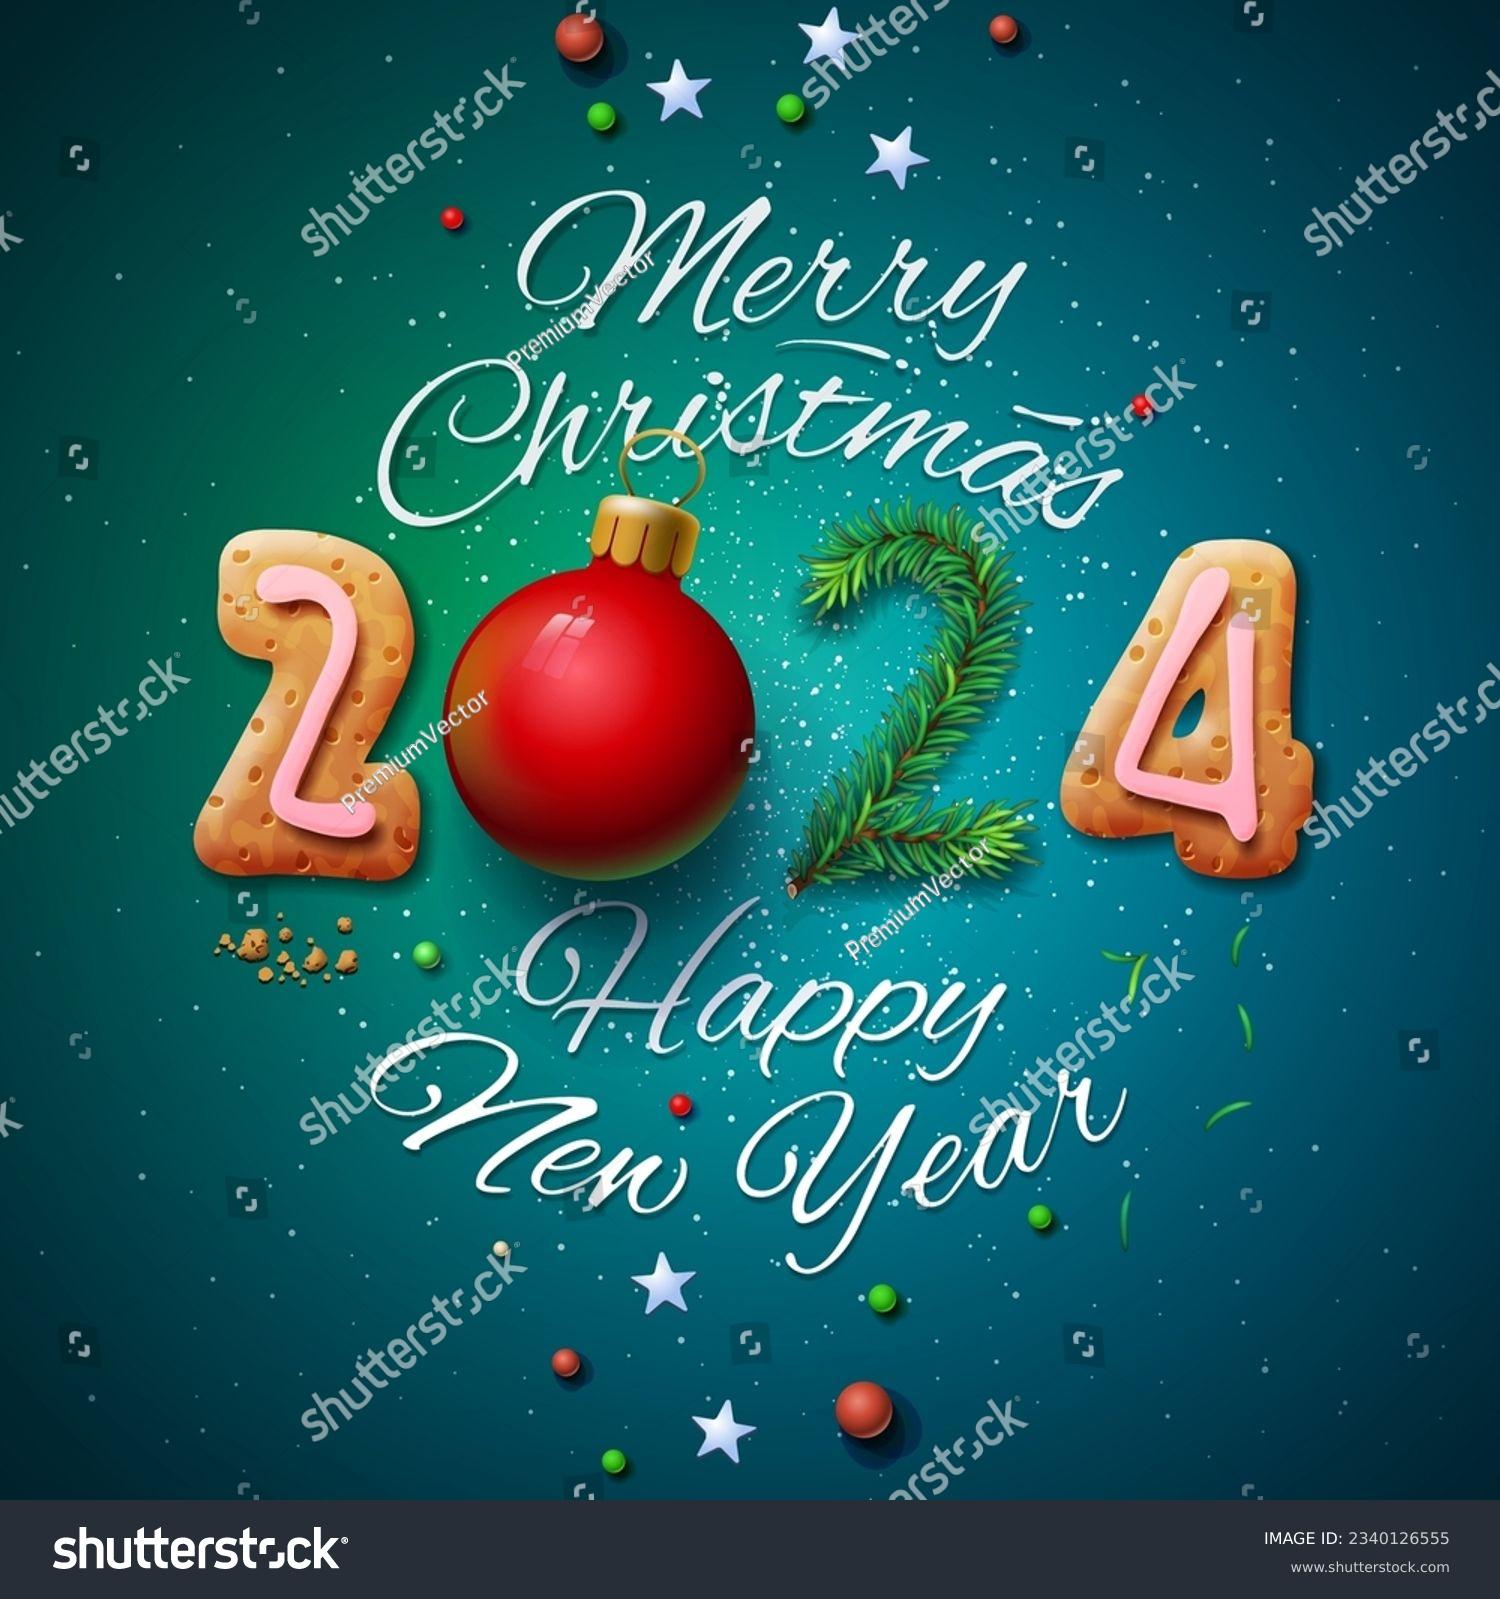 Merry Christmas Happy New Year Stock Vector Royalty Free